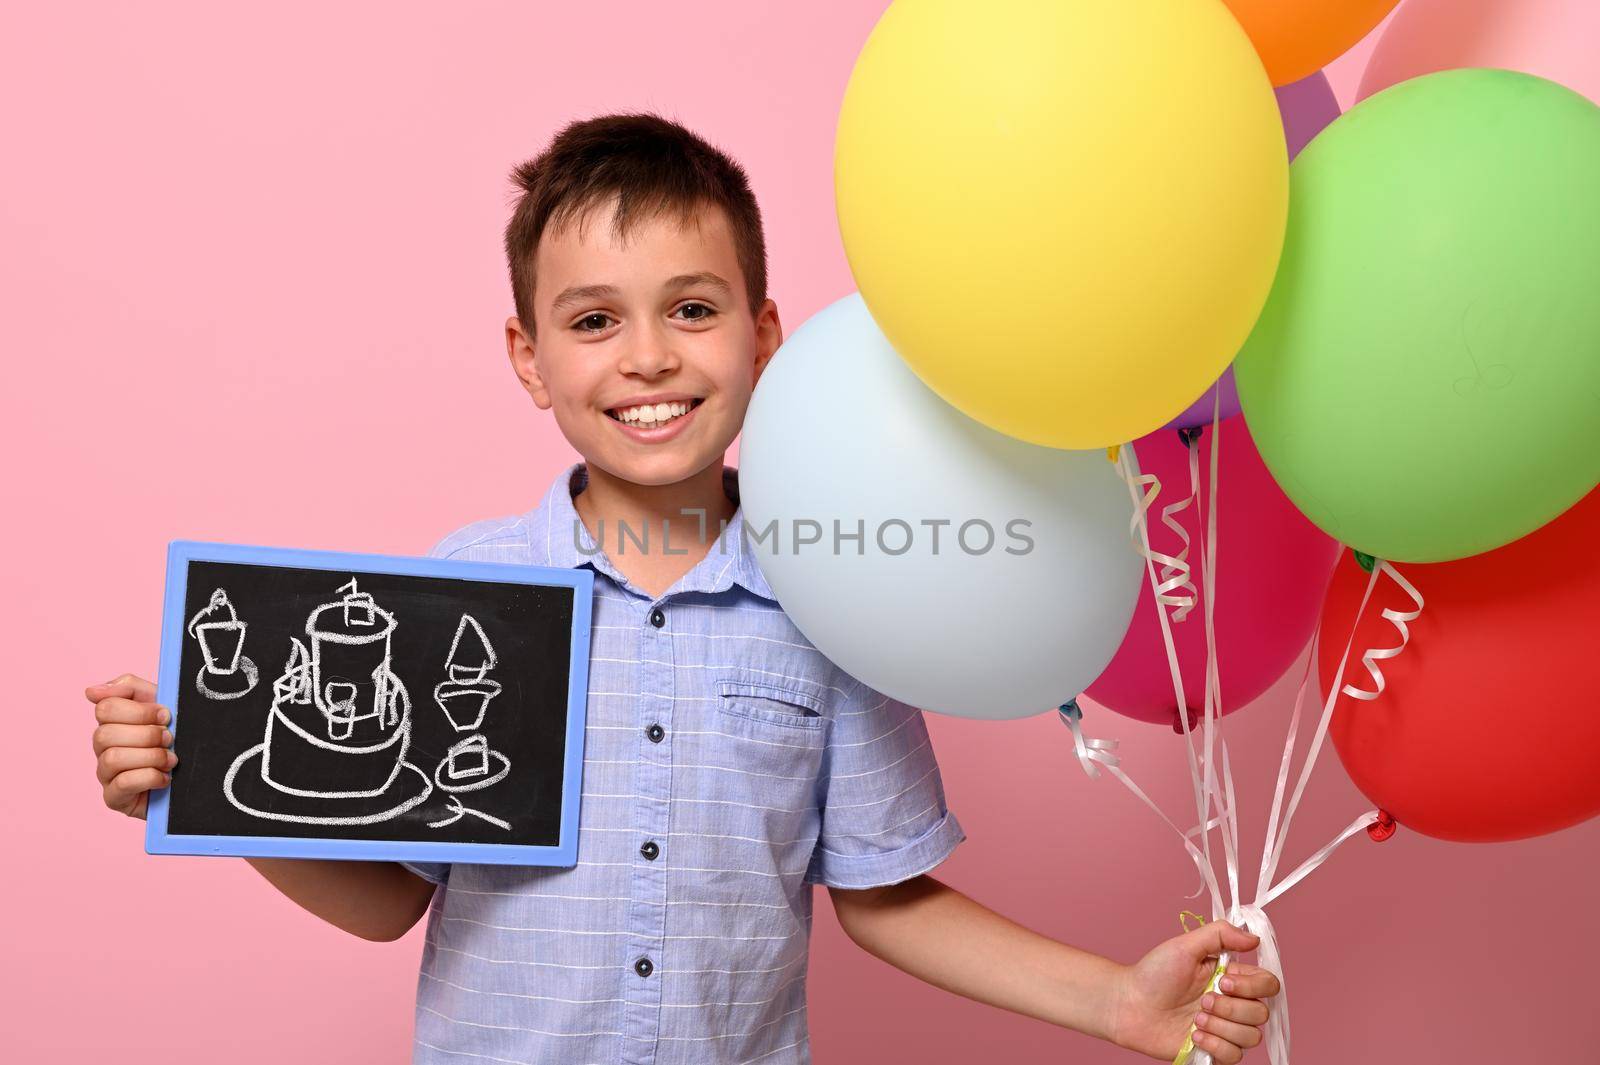 Smiling teenage boy holds multicolored colorful balloons in one hand and a chalkboard with drawn birthday cake in the other. Isolated over pink background with copy space